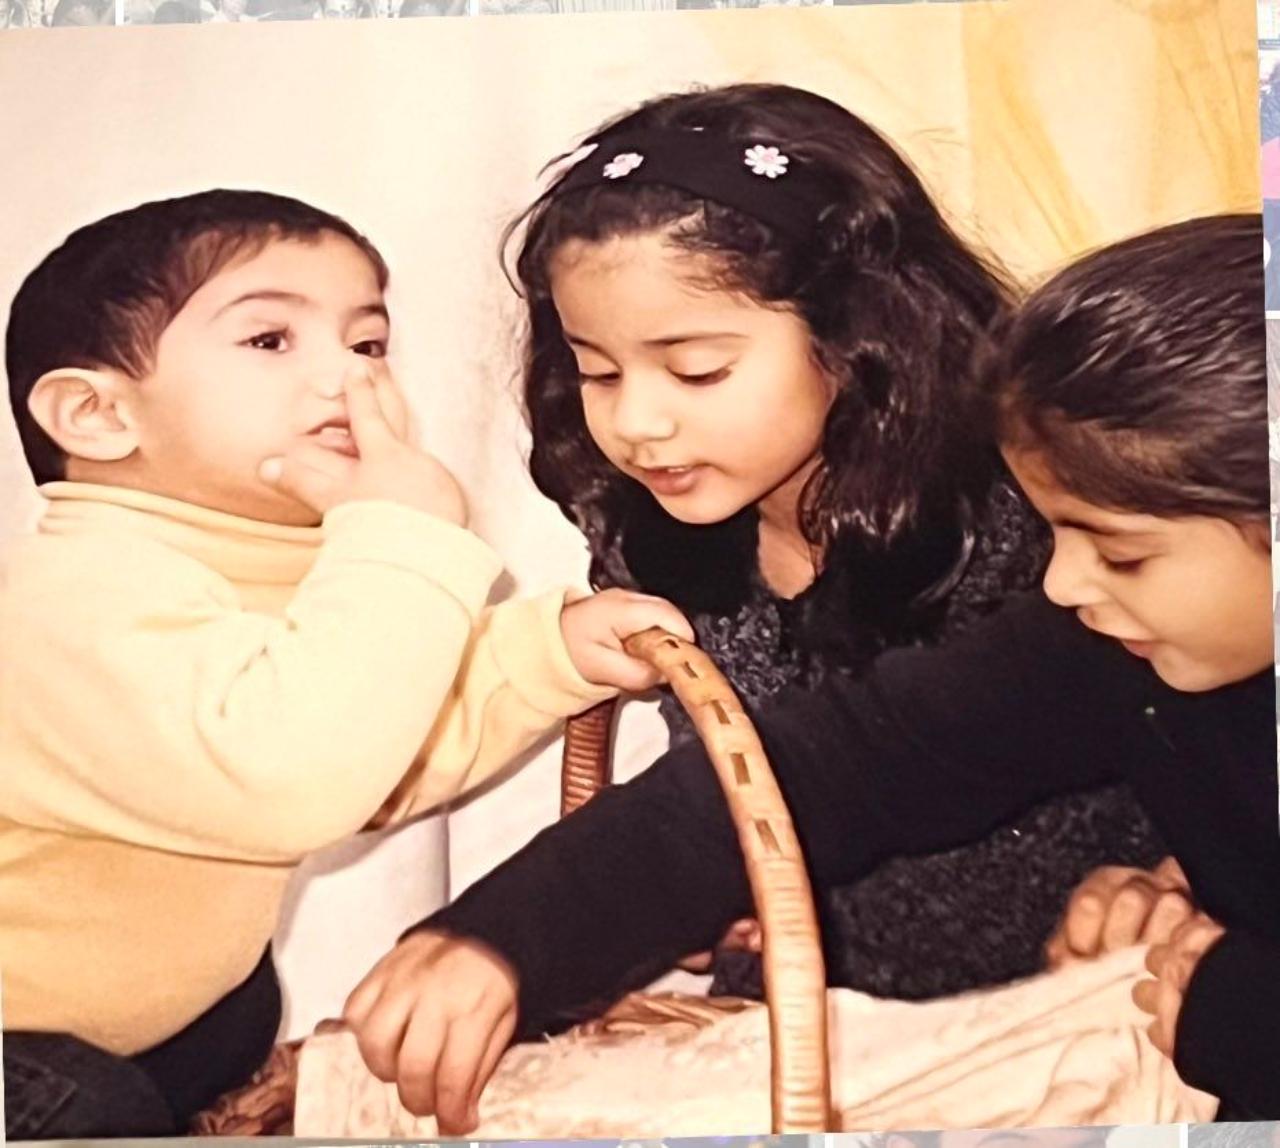 Janhvi Kapoor is Boney Kapoor's elder daughter with late Sridevi. In this picture, a young Janhvi is seen in a candid moment with Amitabh Bachchan's grandkids Agastya Nanda and Navya Nanda